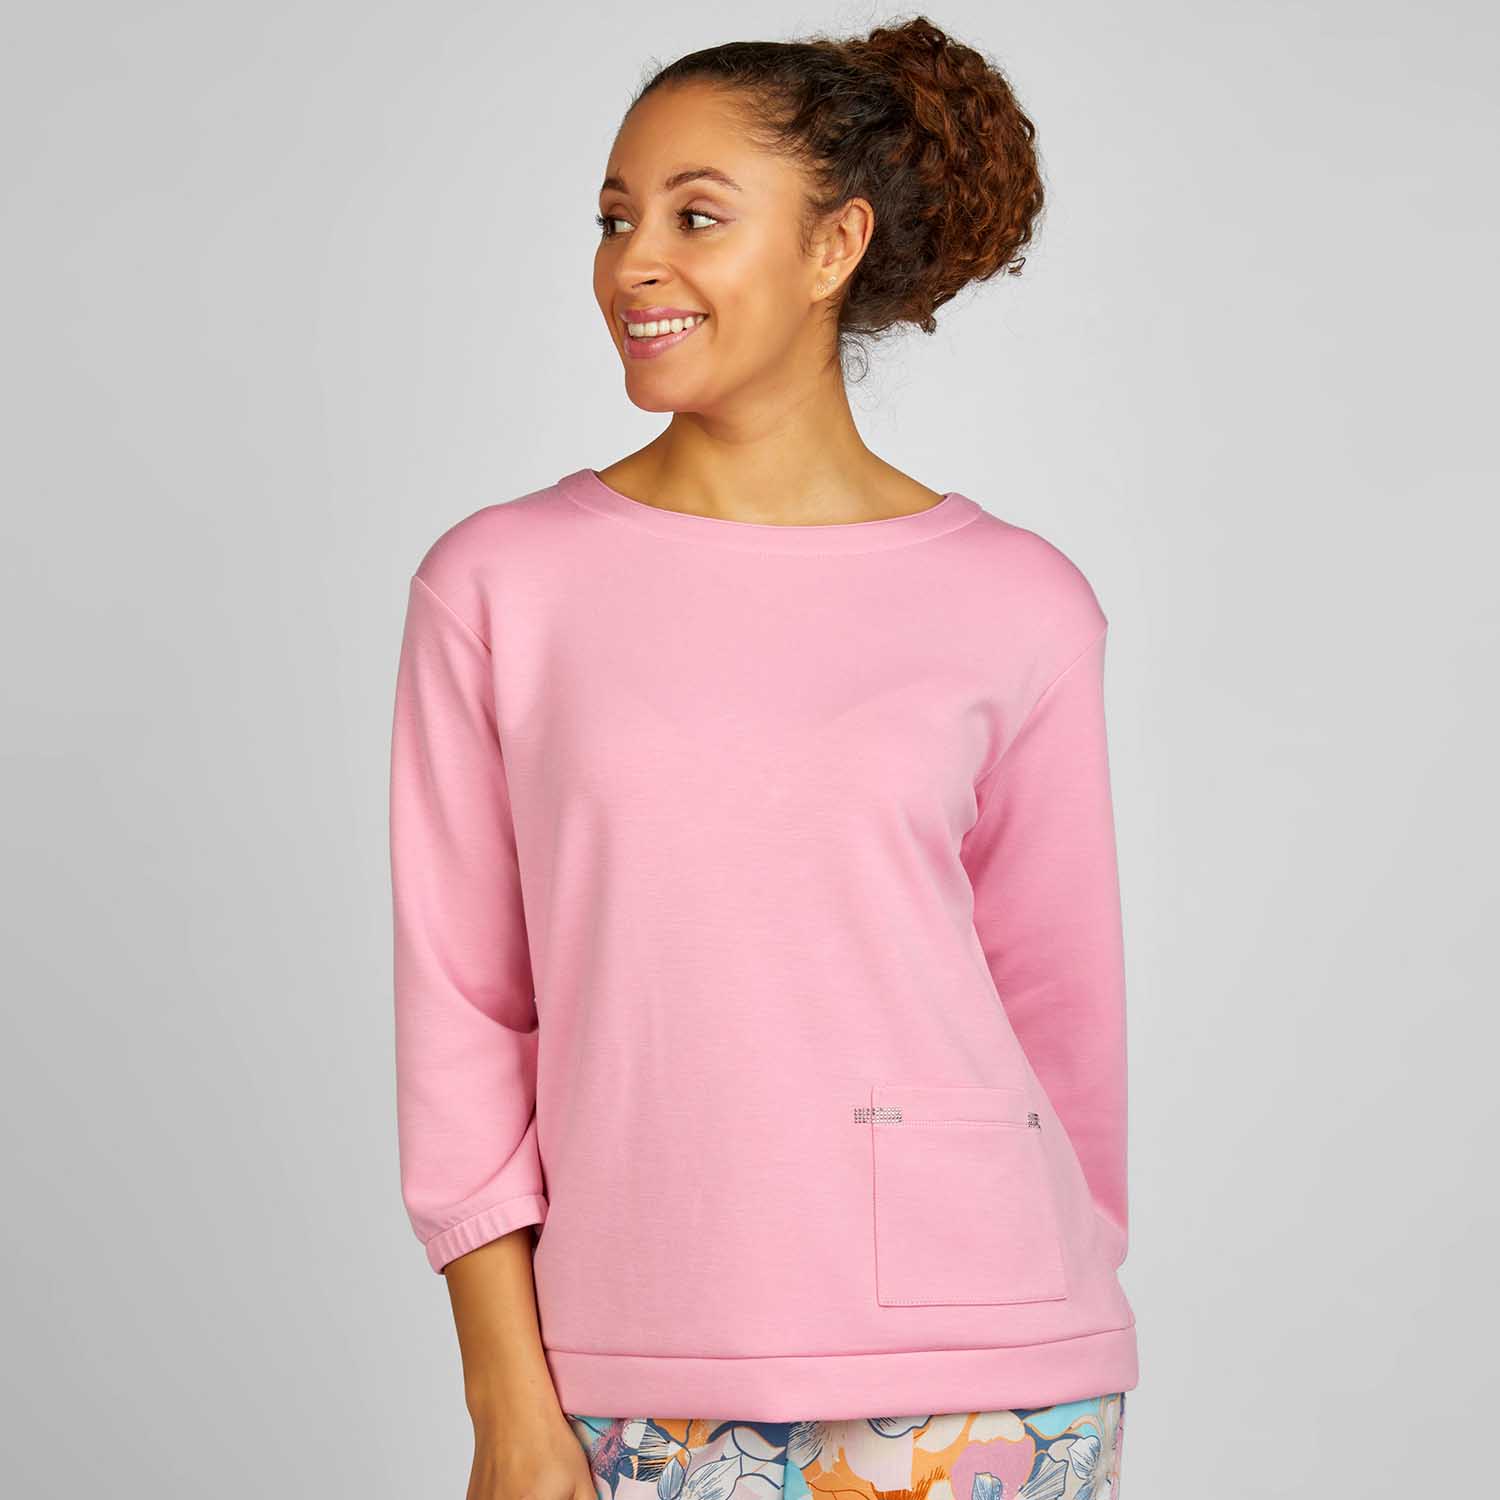 RABE 3/4 Sleeve Top in Raspberry Pink – Obsessions